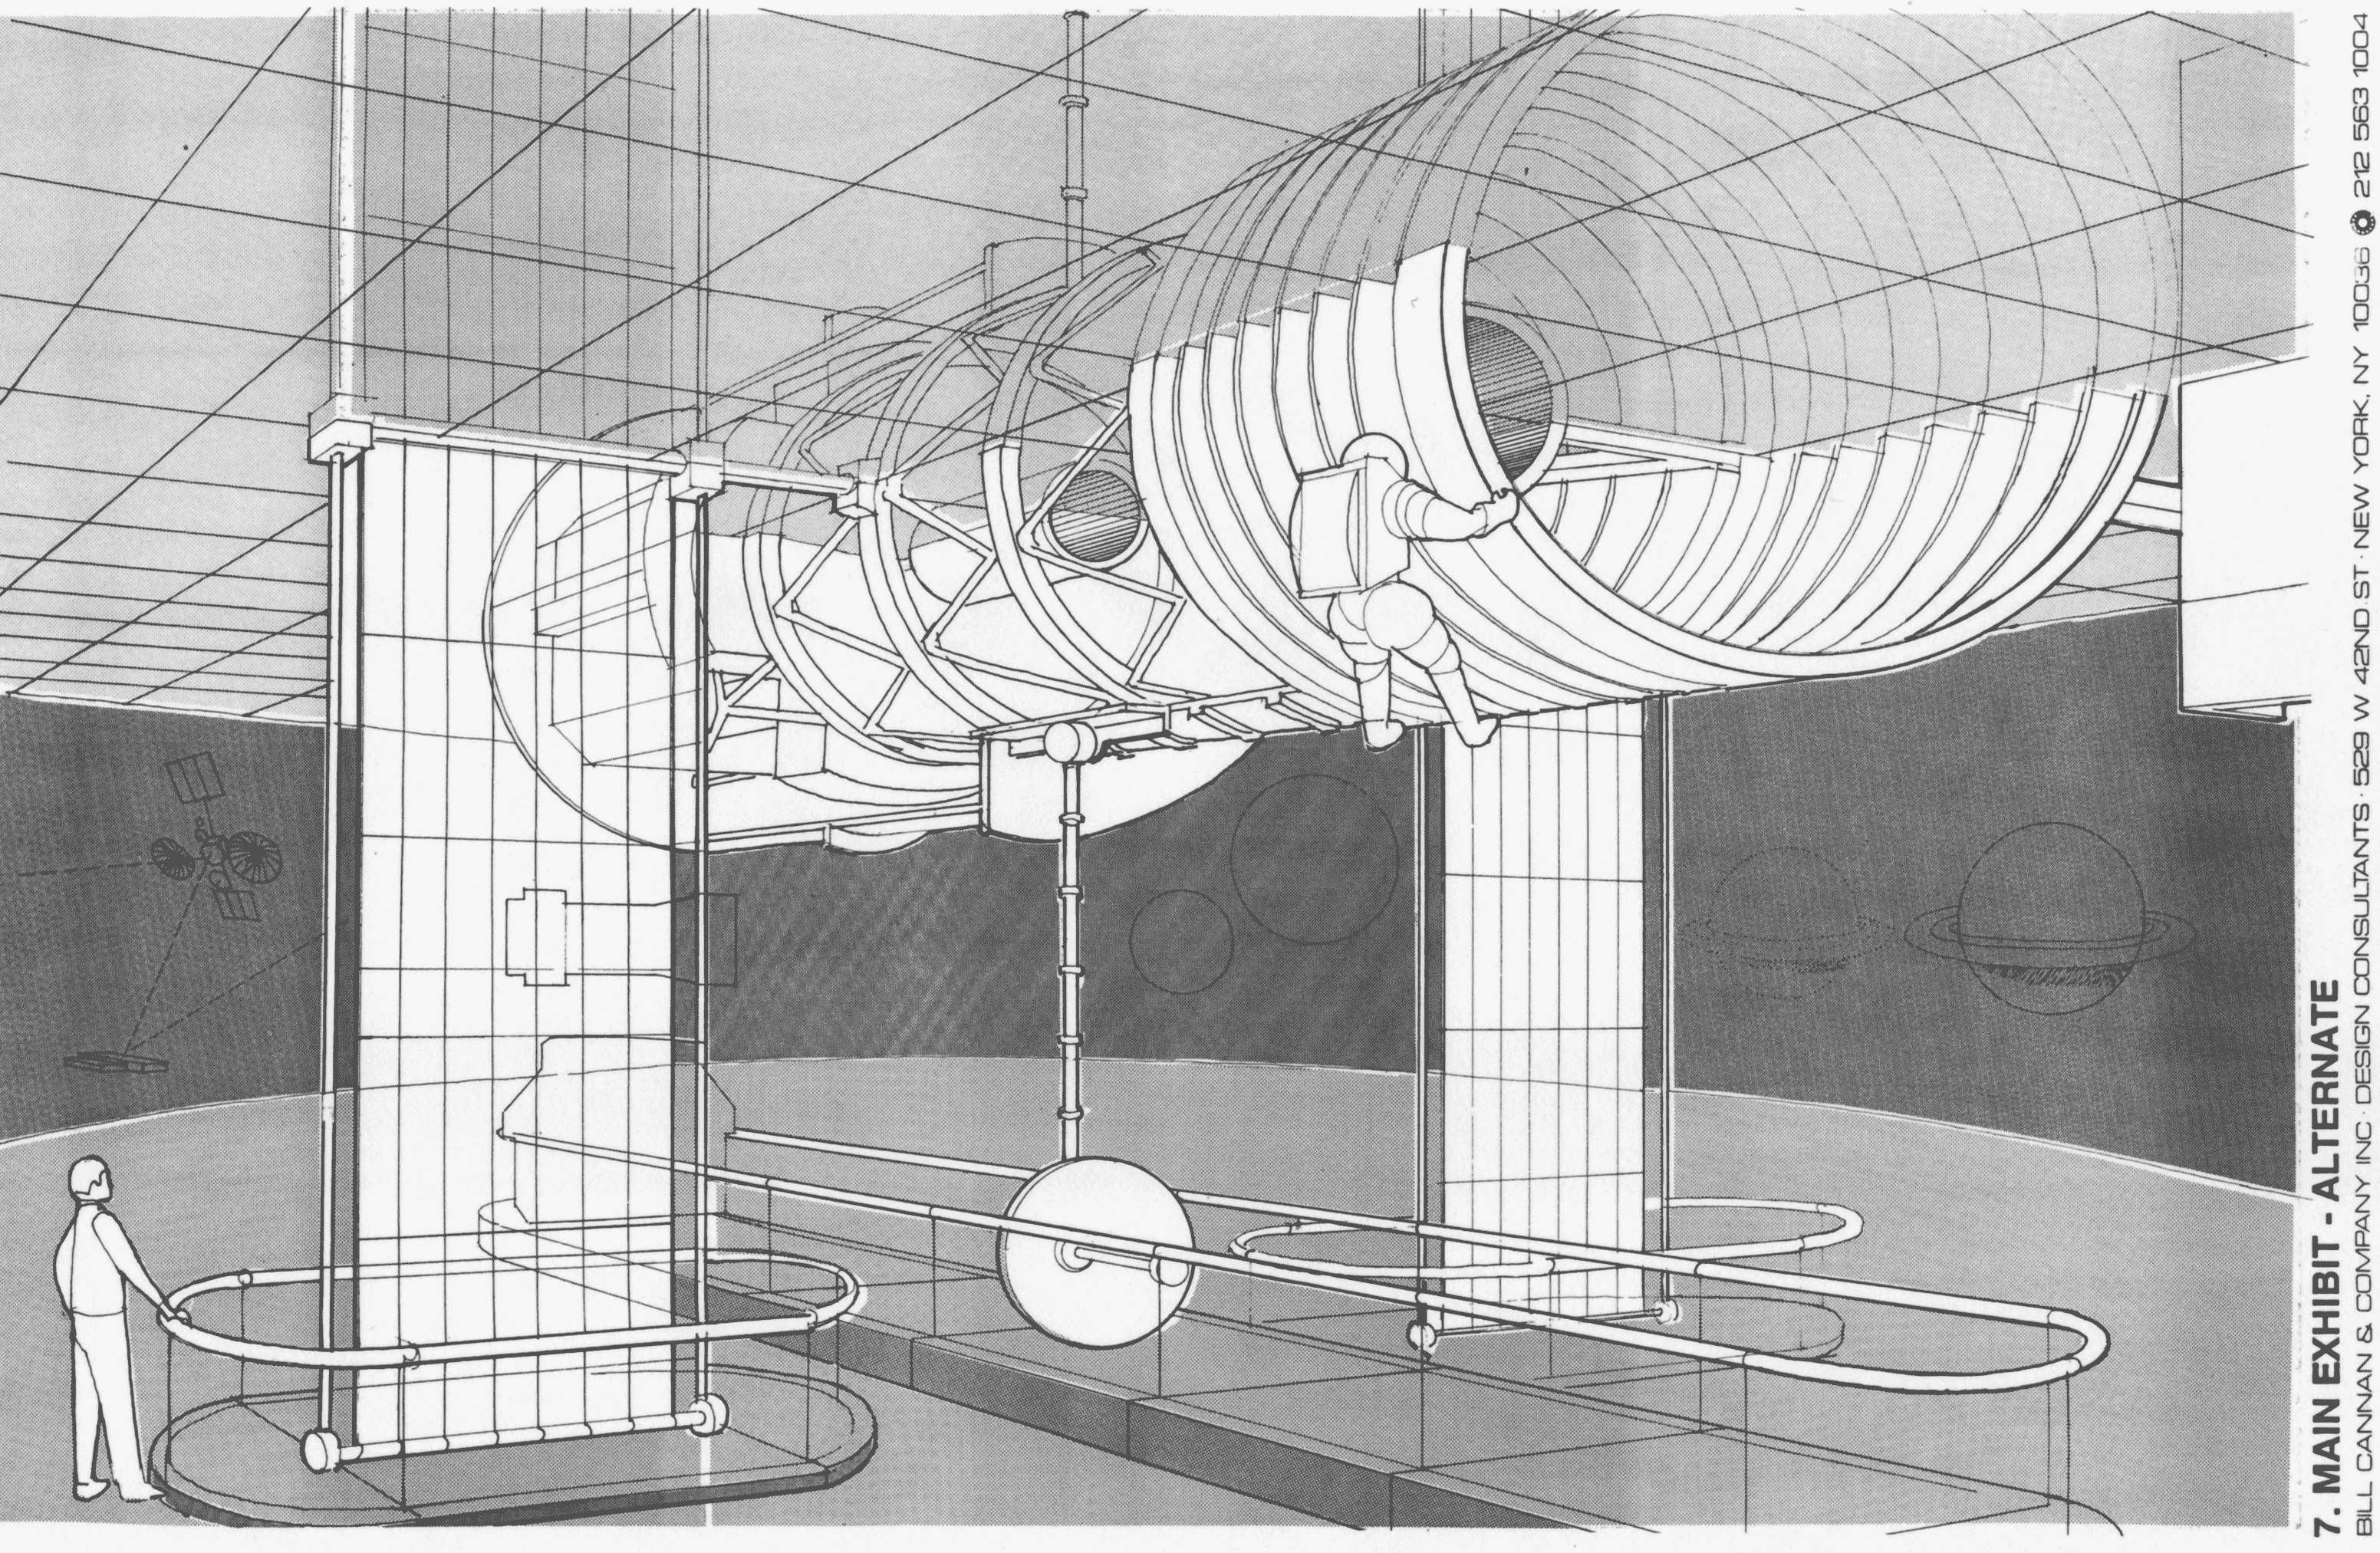 Drawing of ceiling proposal